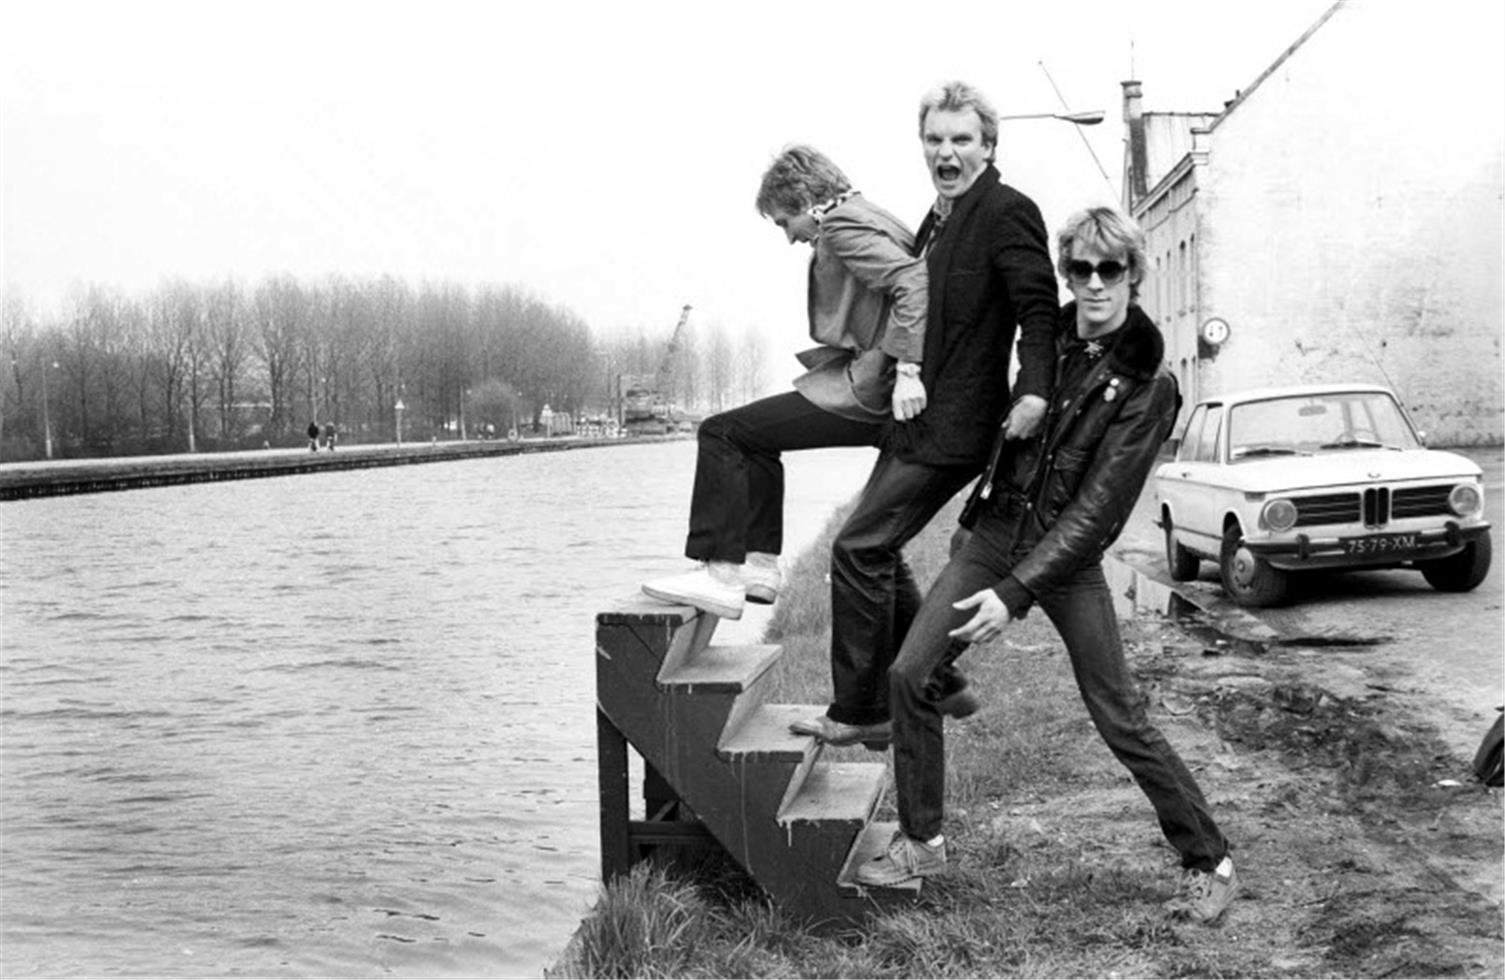 Barry Schultz Black and White Photograph – The Police, Amsterdam, 1979